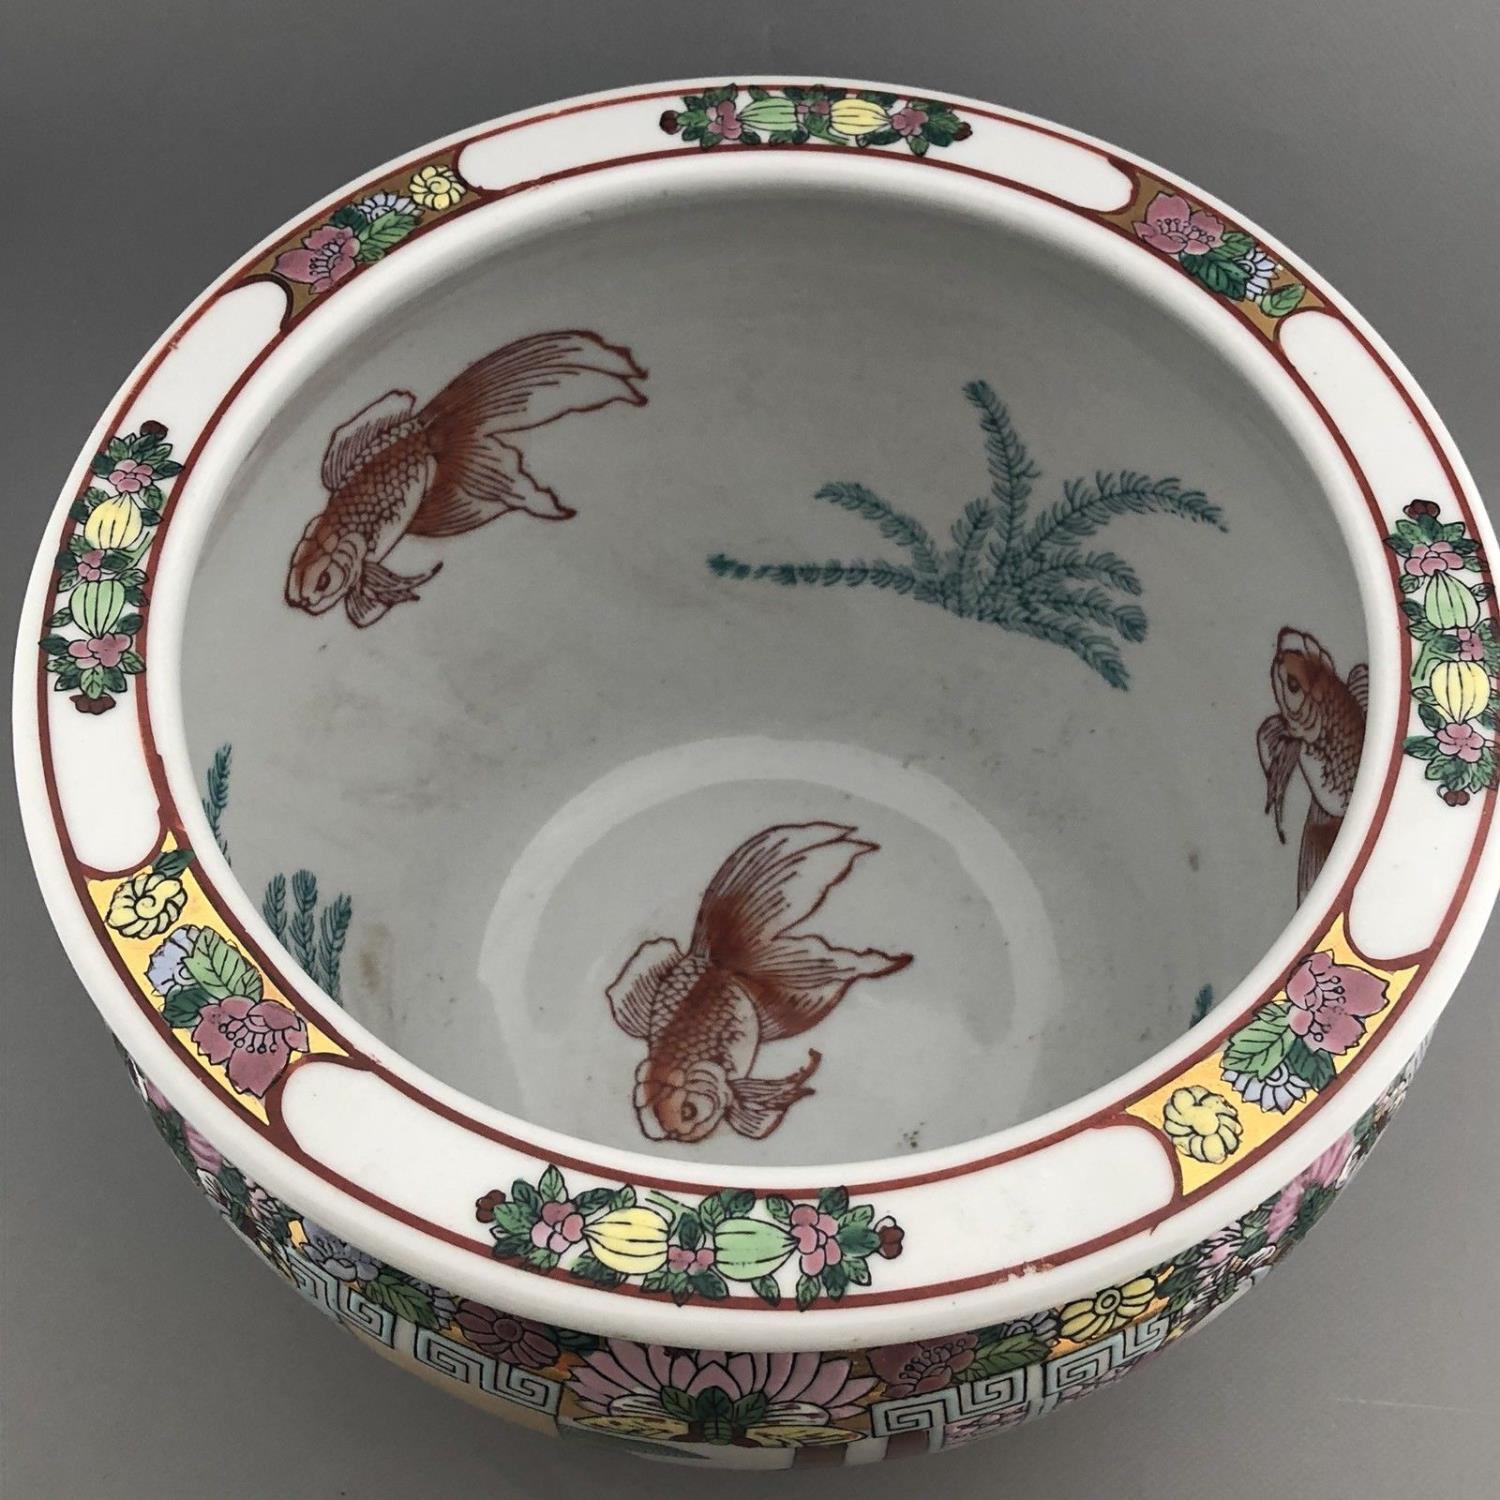 A Large Enamelled Chinese Plant Pot Jardiniere with Fish Bowl Koi Carp Interior - Image 3 of 7